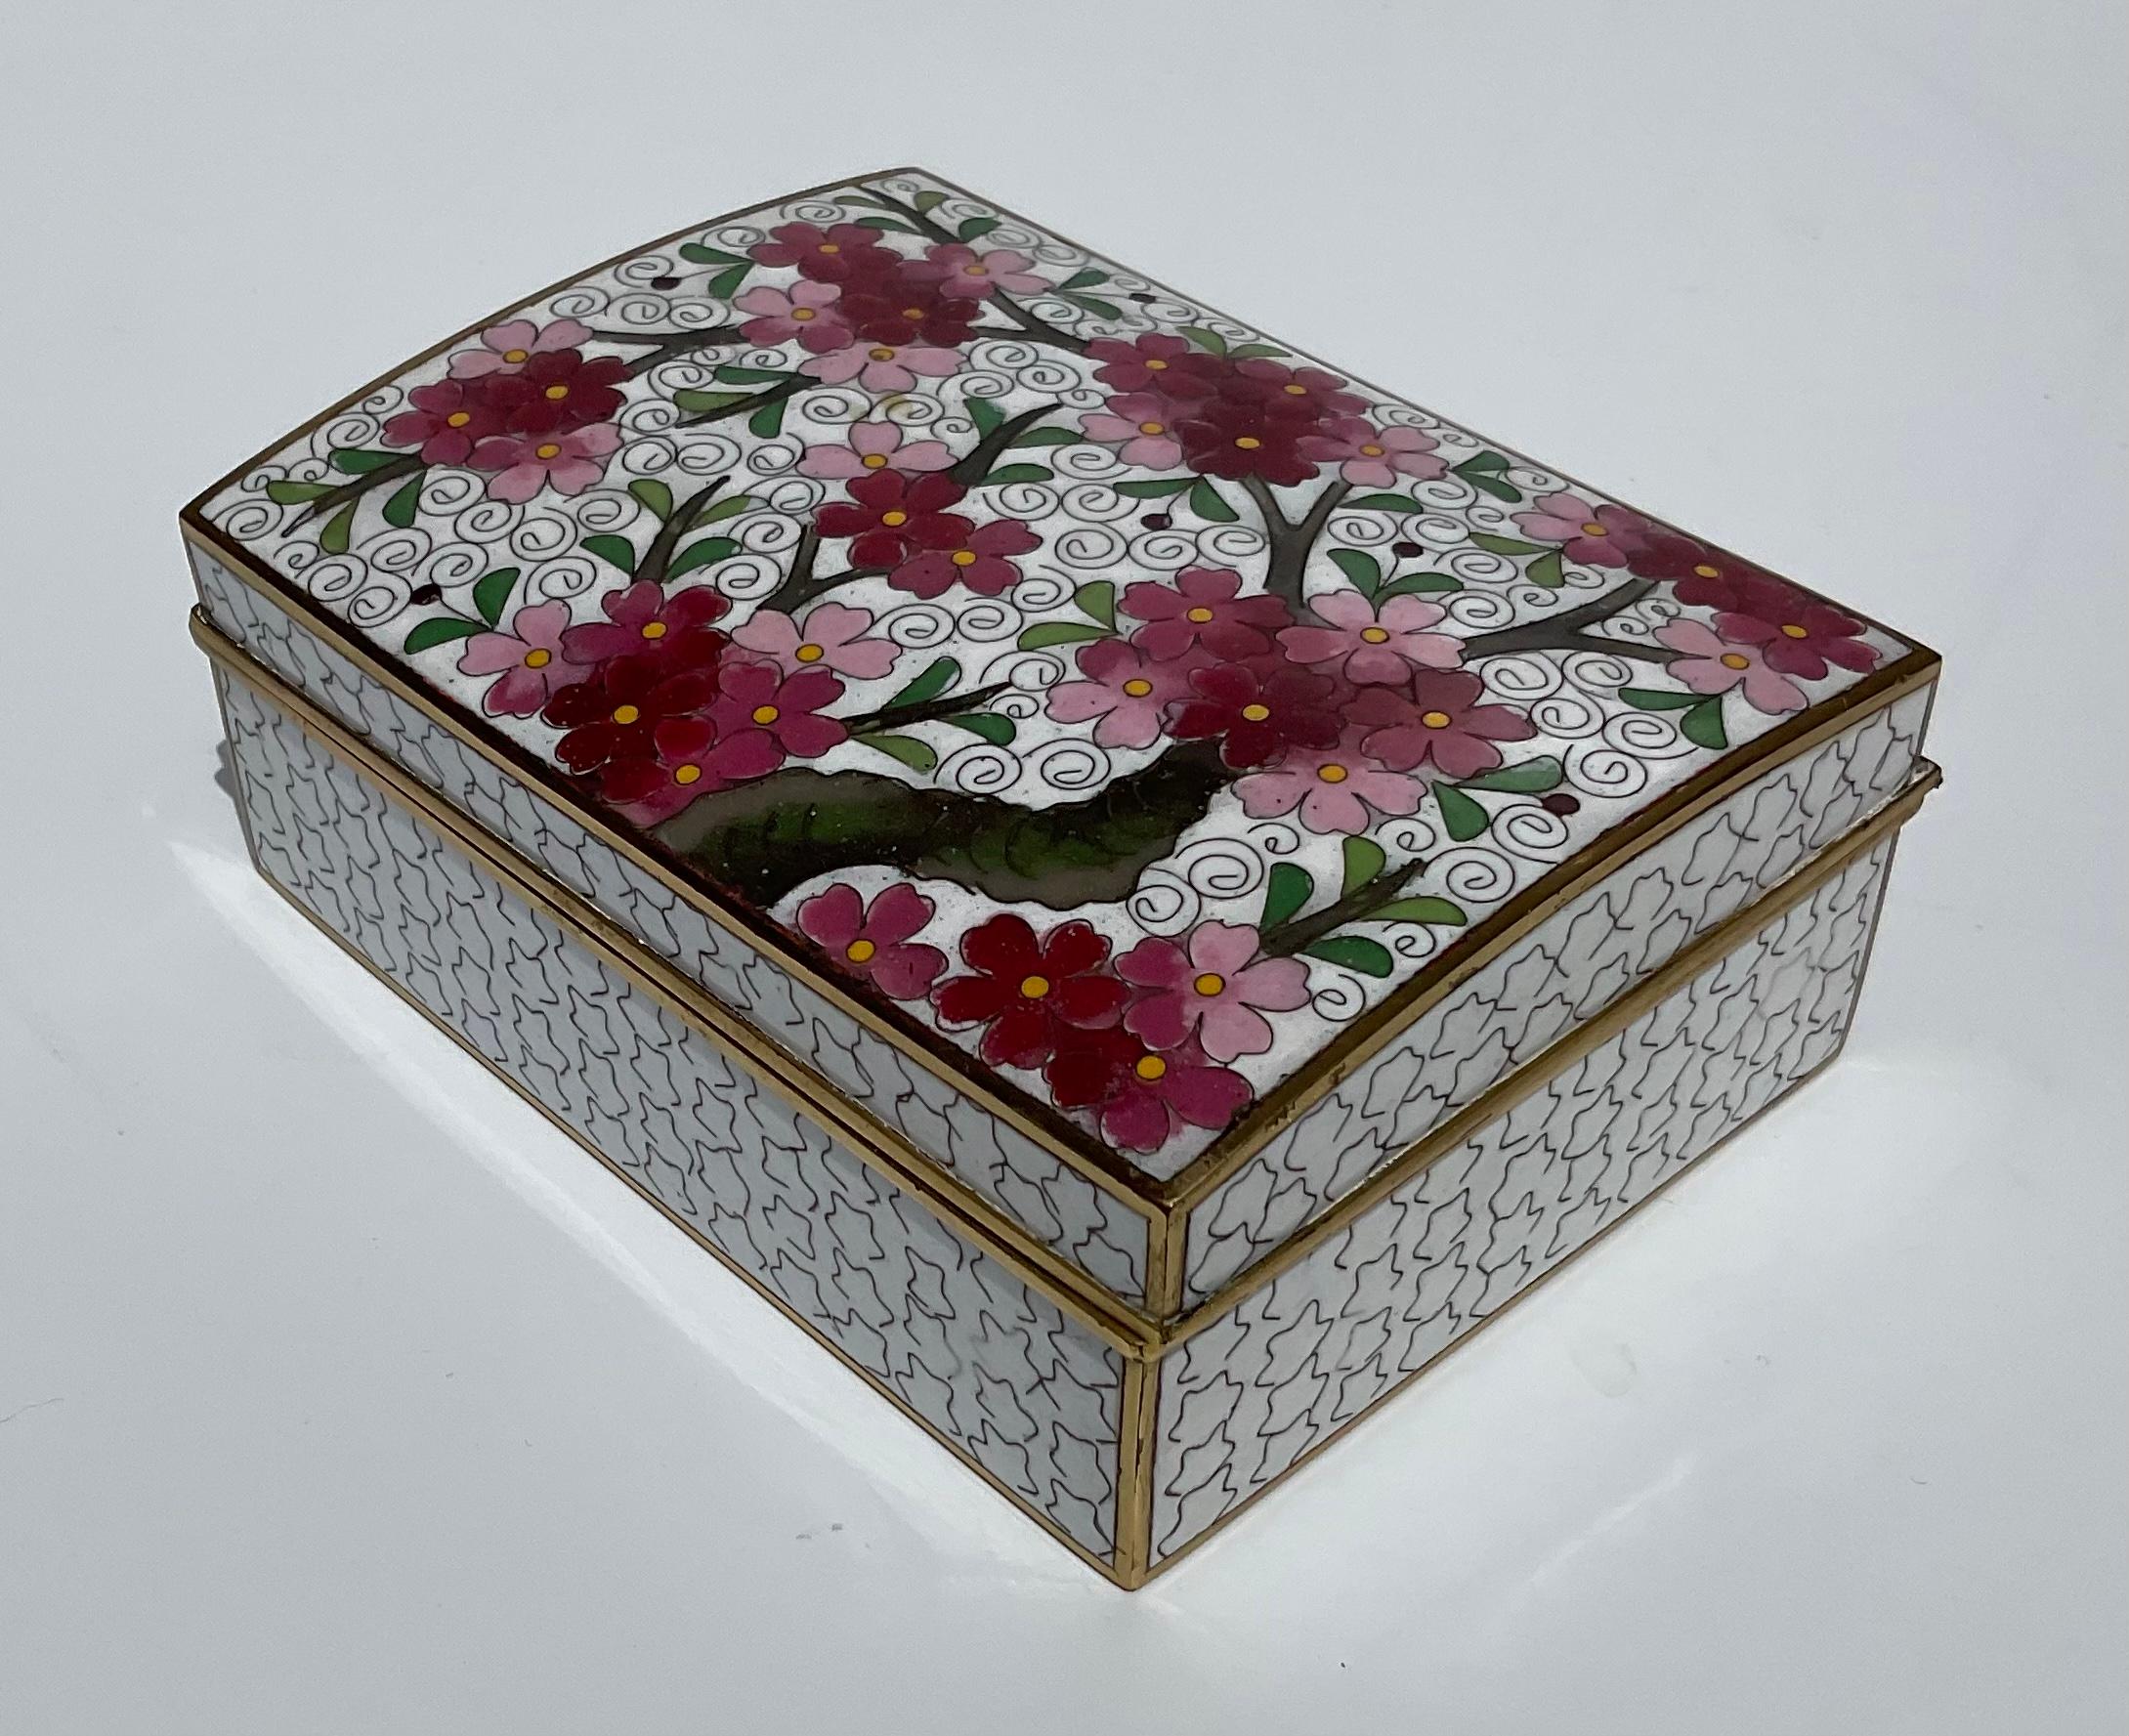 Ando Signed Japanese Flowering Tree Box Cloisonne with Amazing Design In Good Condition For Sale In Ann Arbor, MI